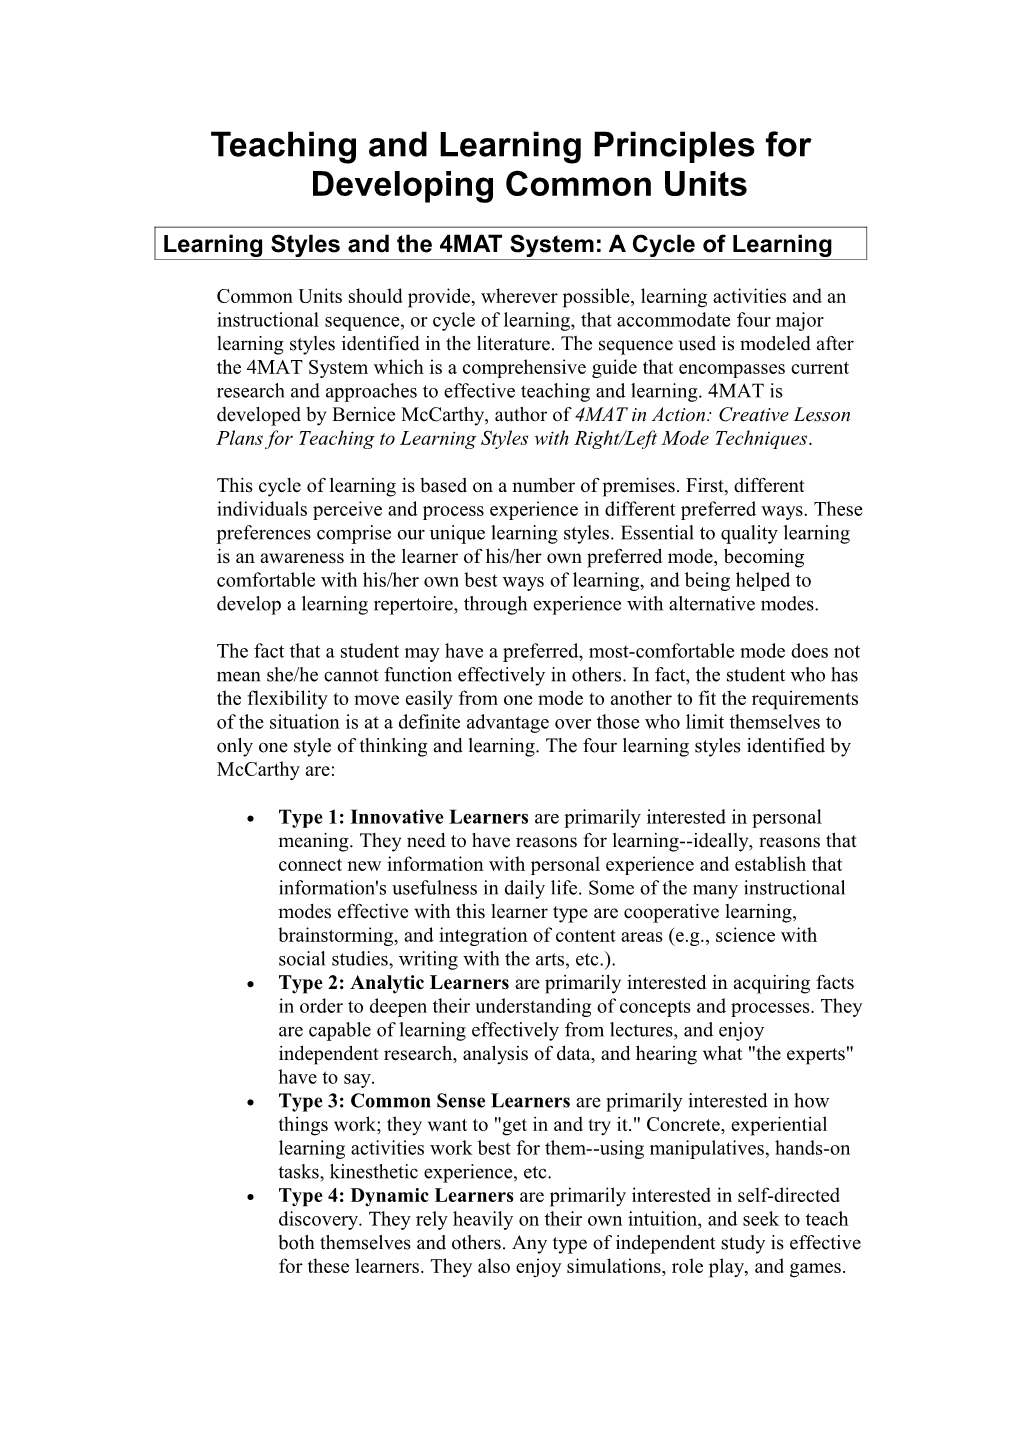 Learning Styles and the 4MAT System